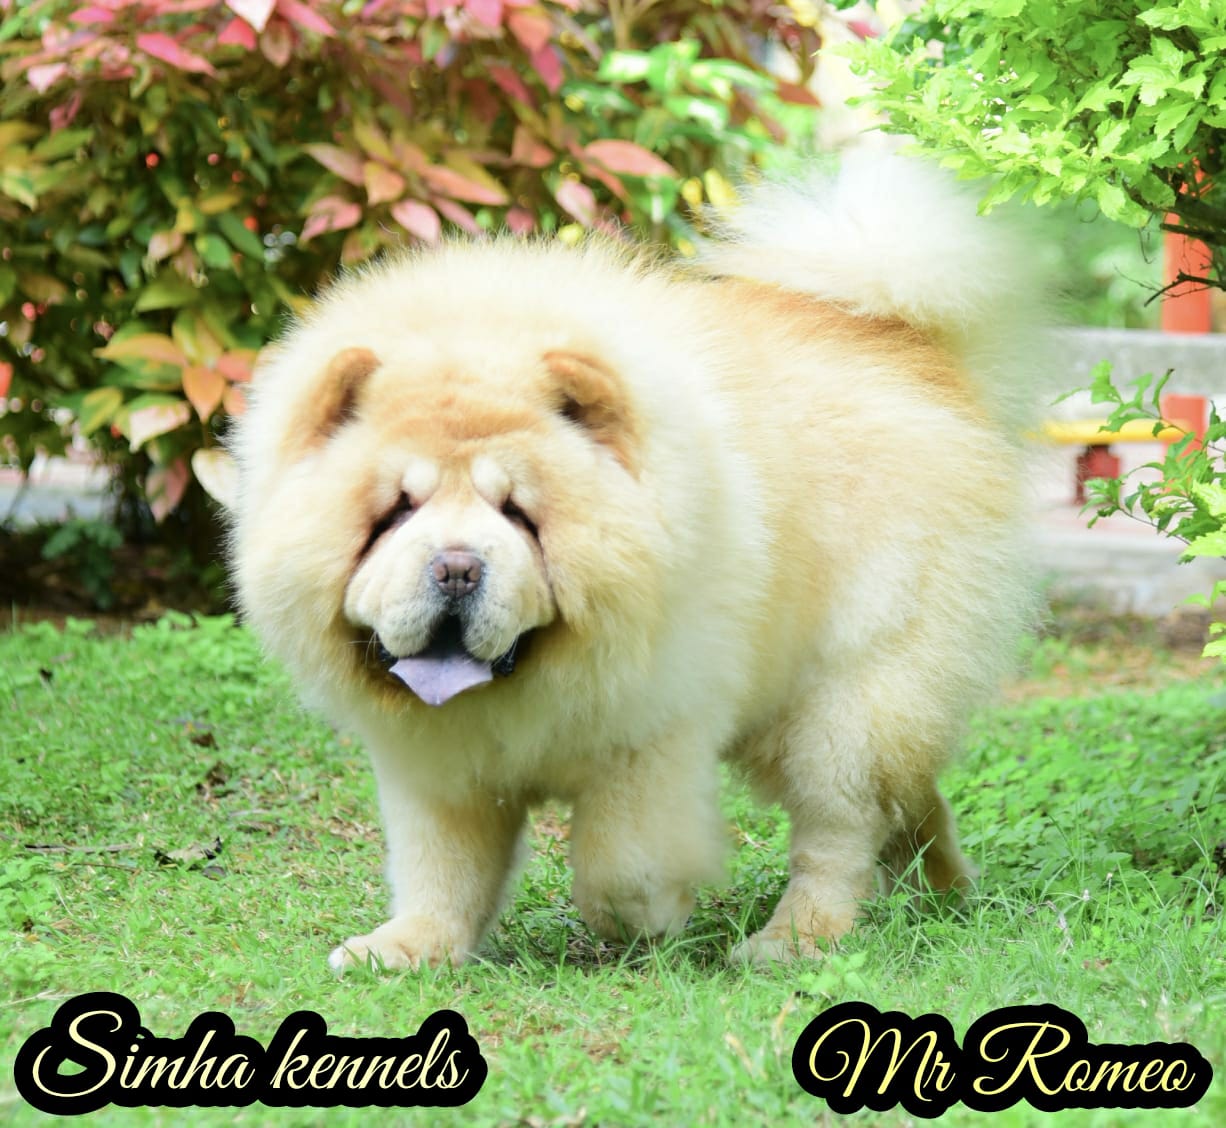 Chow Chow puppies from Bangalore. Breeder: Simha kennels